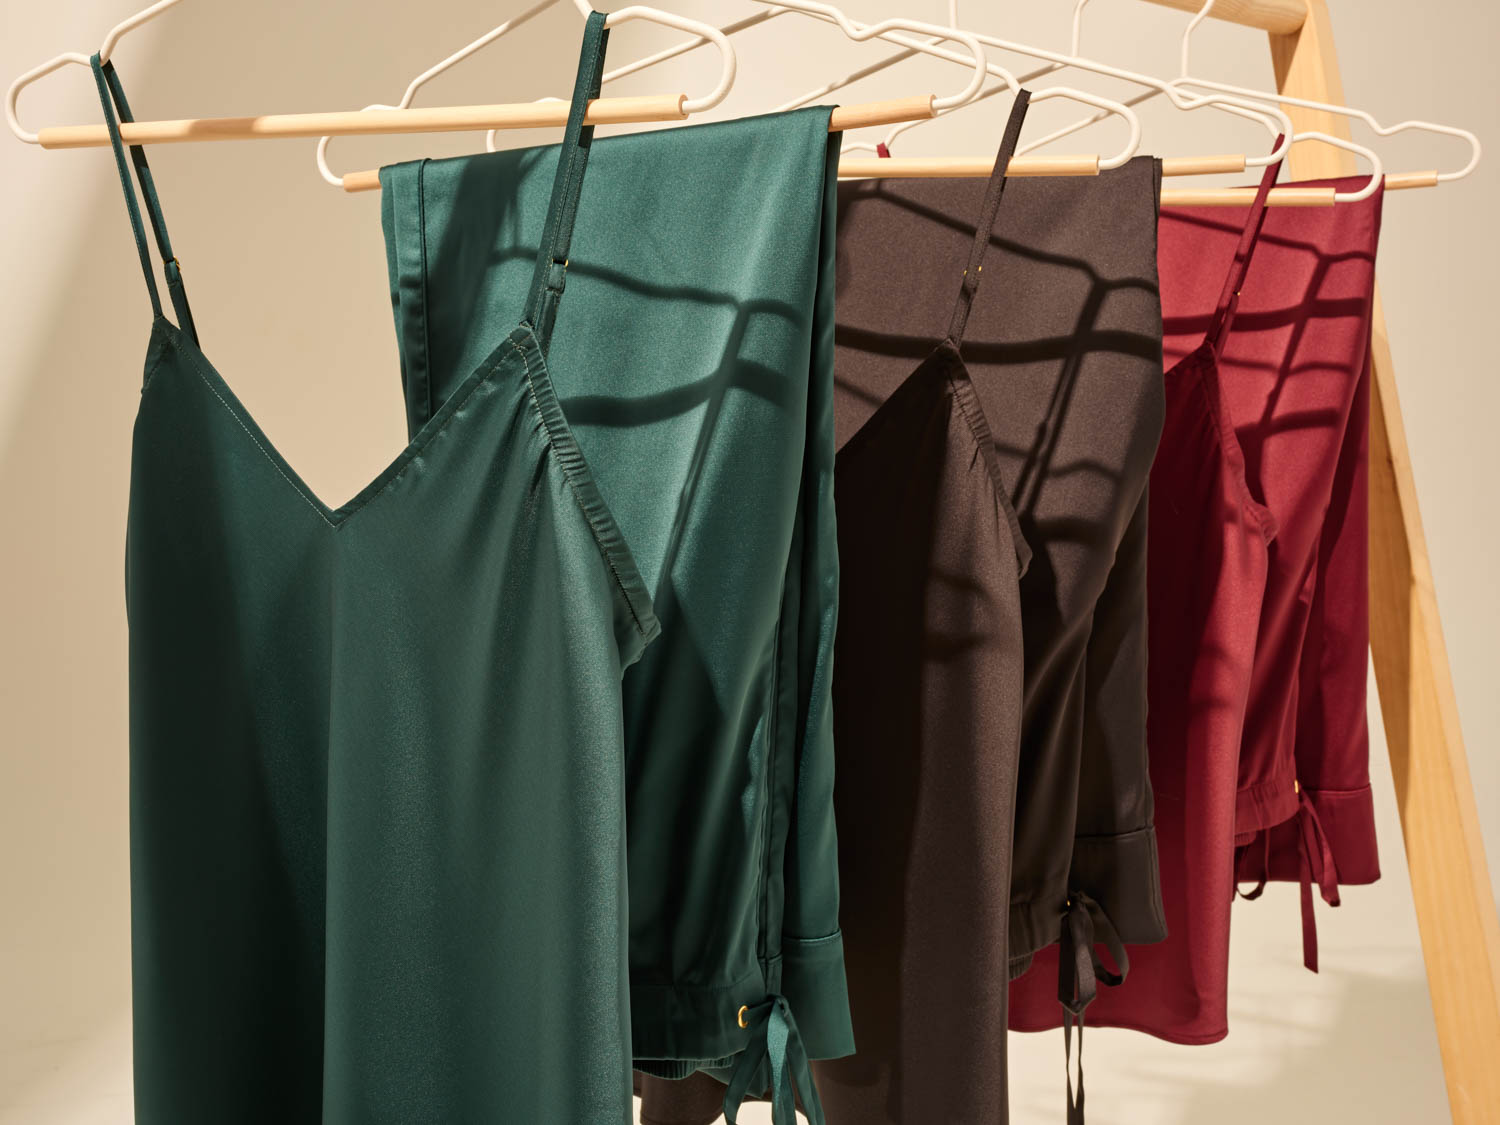 Soma<sup class=st-superscript>®</sup> satin pajama separates in dark green, black, and burgundy hanging in a row on a rack.